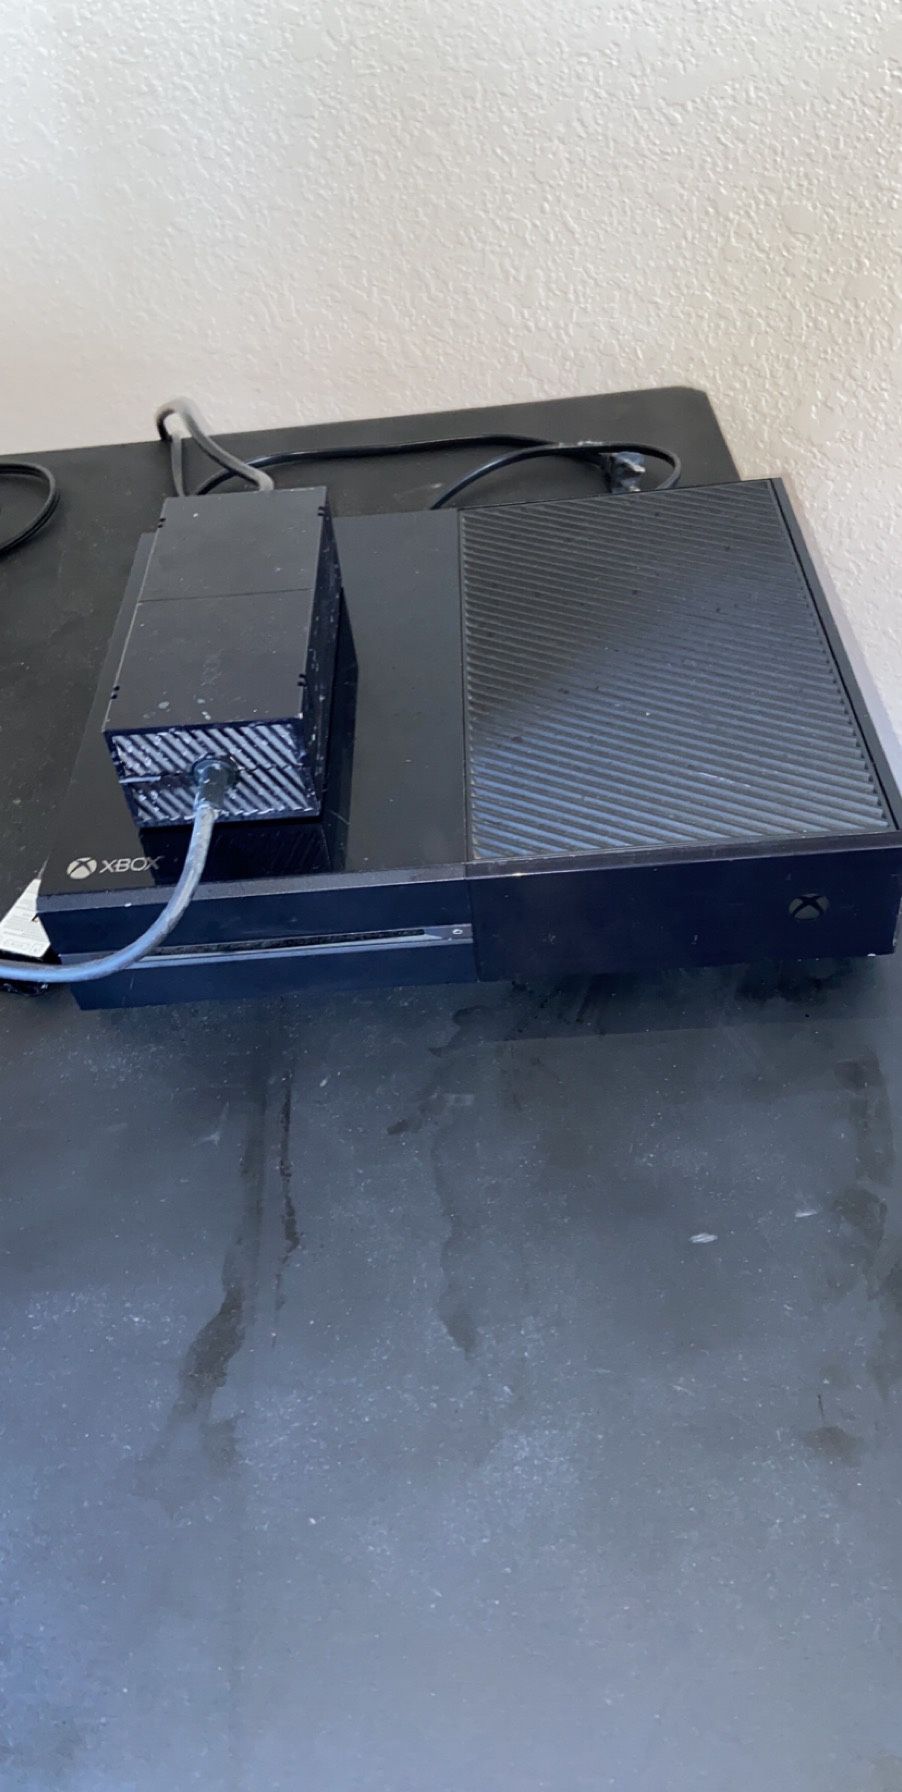 Xbox one (without control or HDMI), OBO